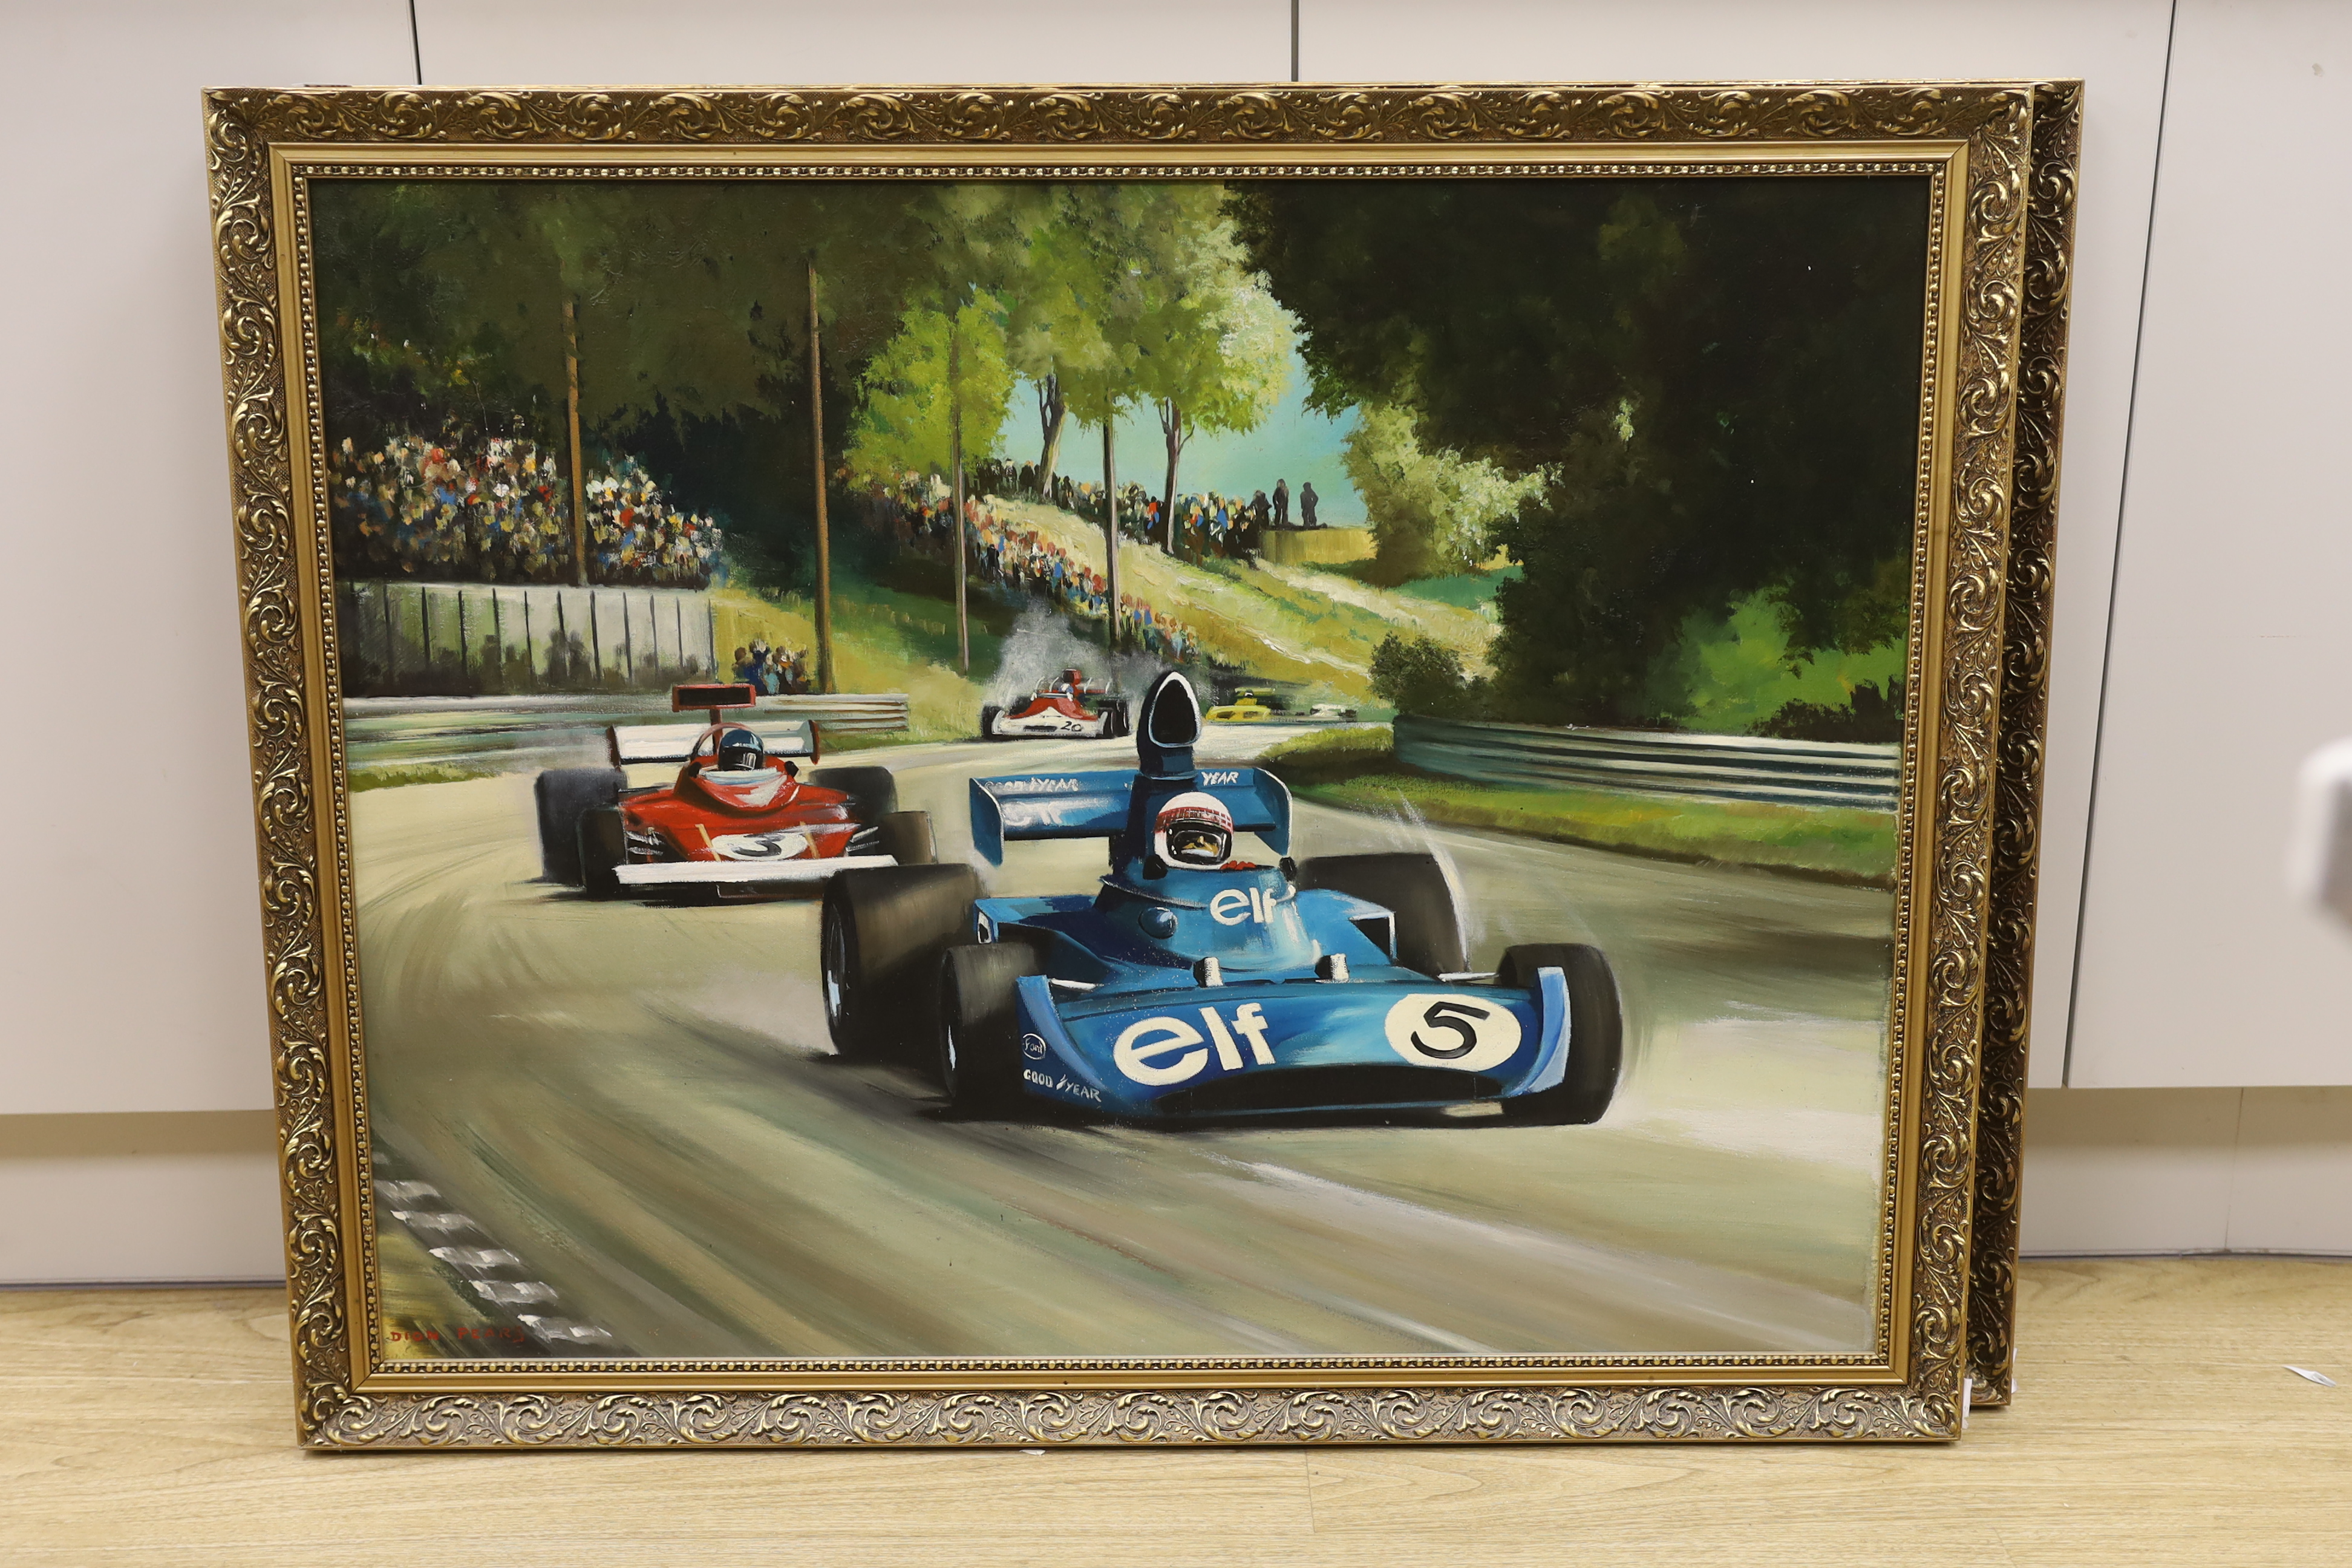 Dion Pears (1929-1985), oil on board, 'Formula 1 racing scene', signed, 69 x 90cm